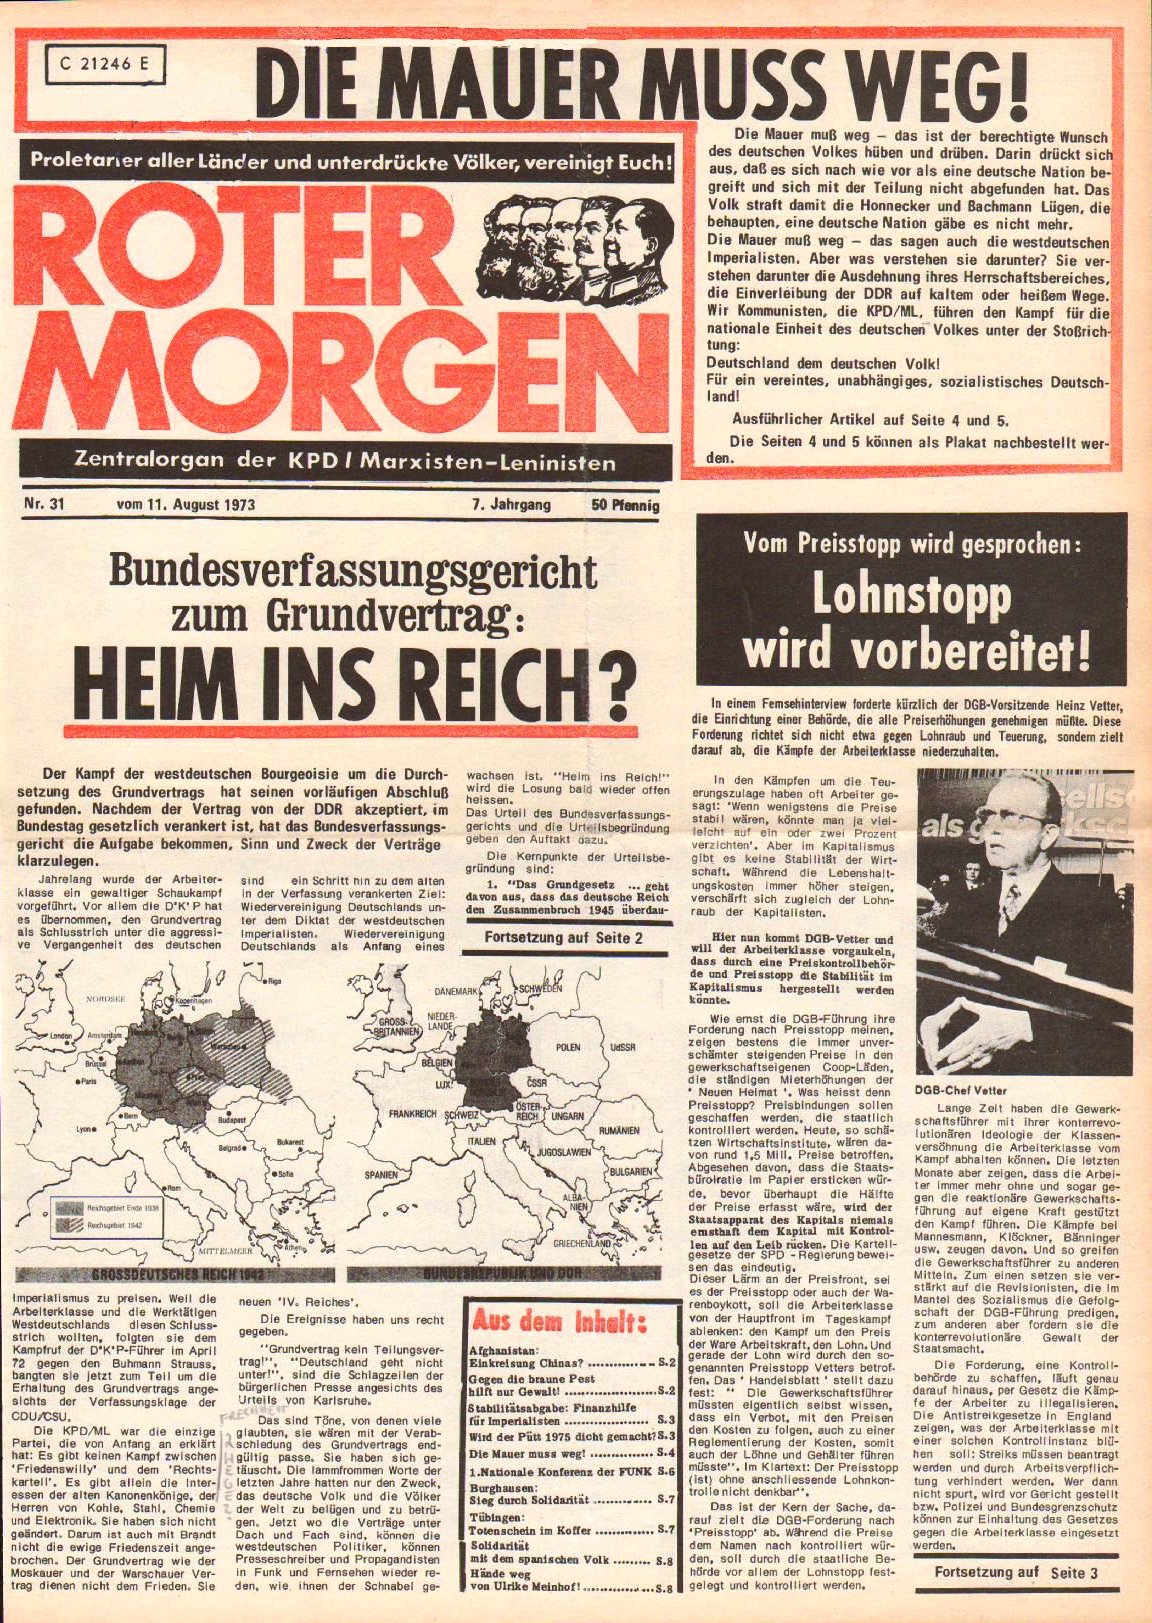 Roter Morgen, 7. Jg., 11. August 1973, Nr. 31, Seite 1